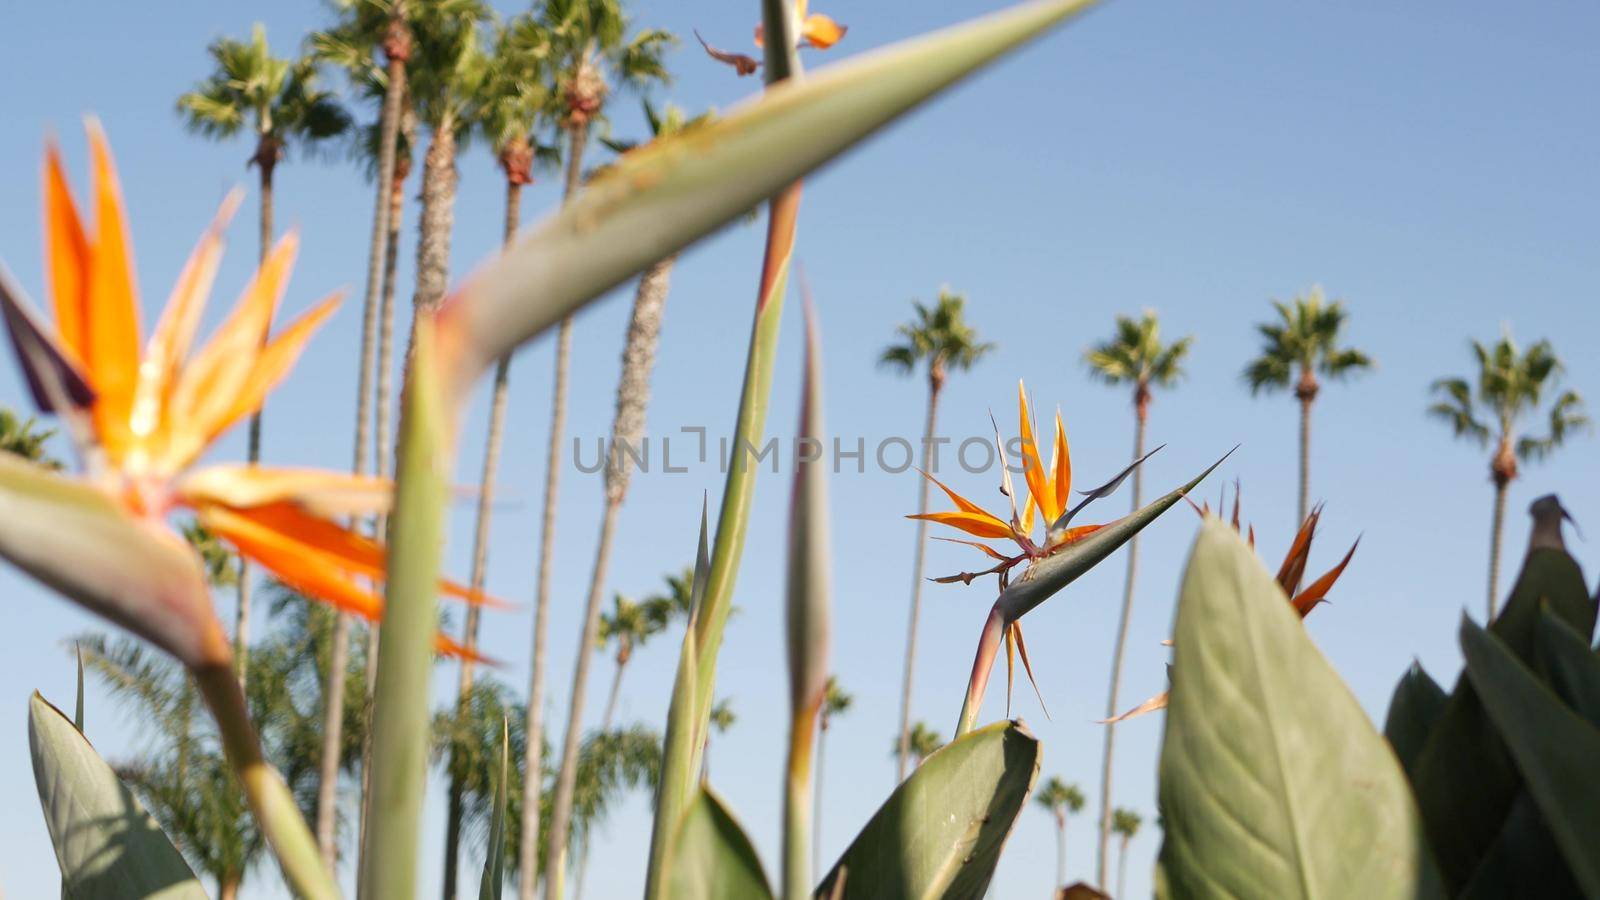 Palms in Los Angeles, California, USA. Summertime aesthetic of Santa Monica and Venice Beach on Pacific ocean. Strelitzia bird of paradise flower. Atmosphere of Beverly Hills in Hollywood. LA vibes by DogoraSun